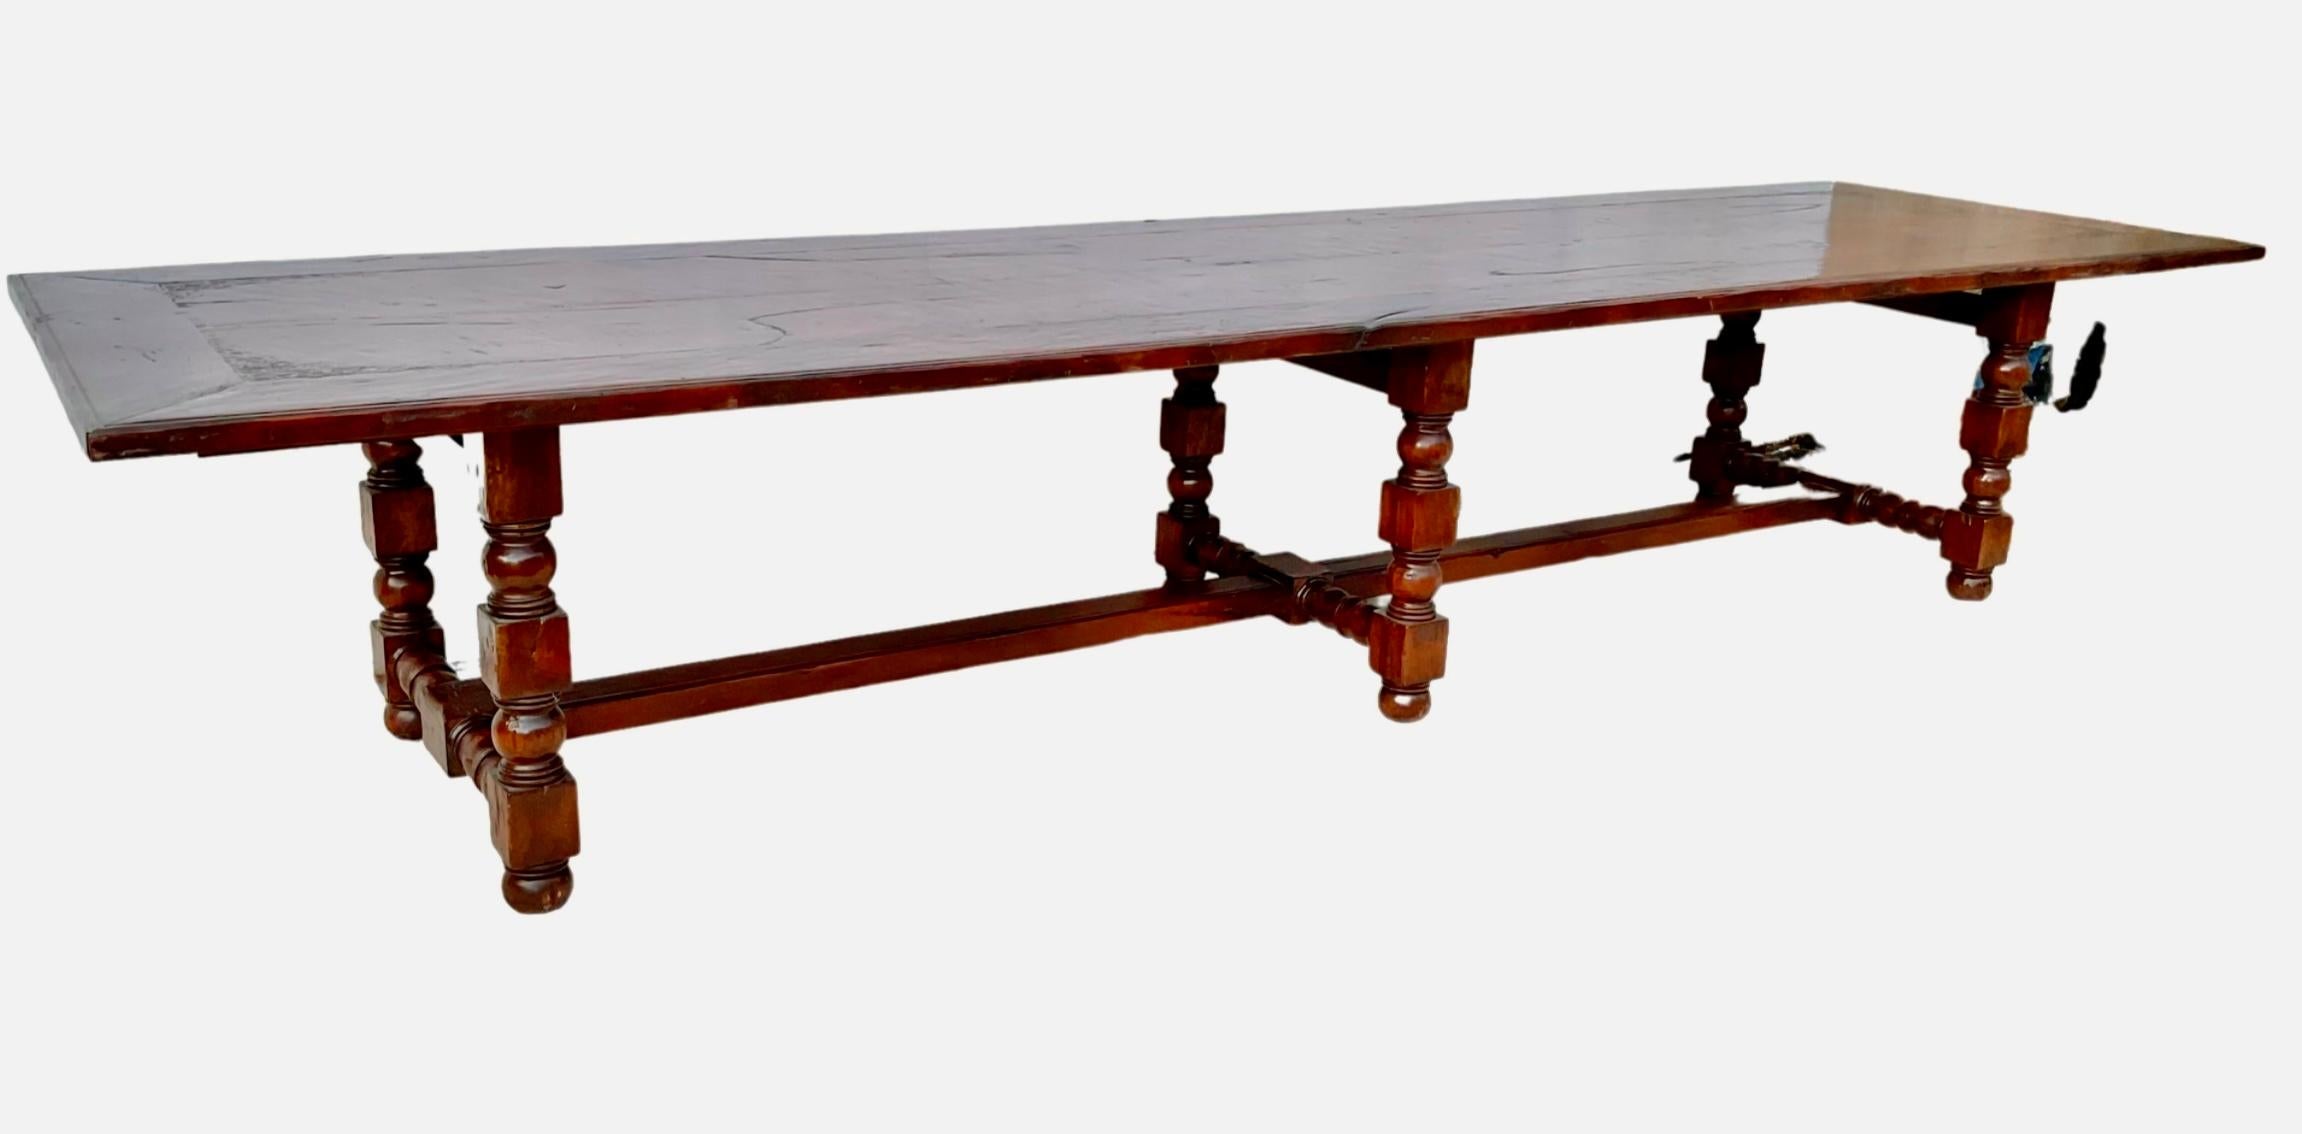 Monumental, 13 ft 6 in. long Jacobean style mahogany dining table. Large enough to easily serve a party of 12 to 14 people, in supreme comfort. Raised on 6 turned baluster supports joined by a central H stretcher. Designed for a grand room and seats